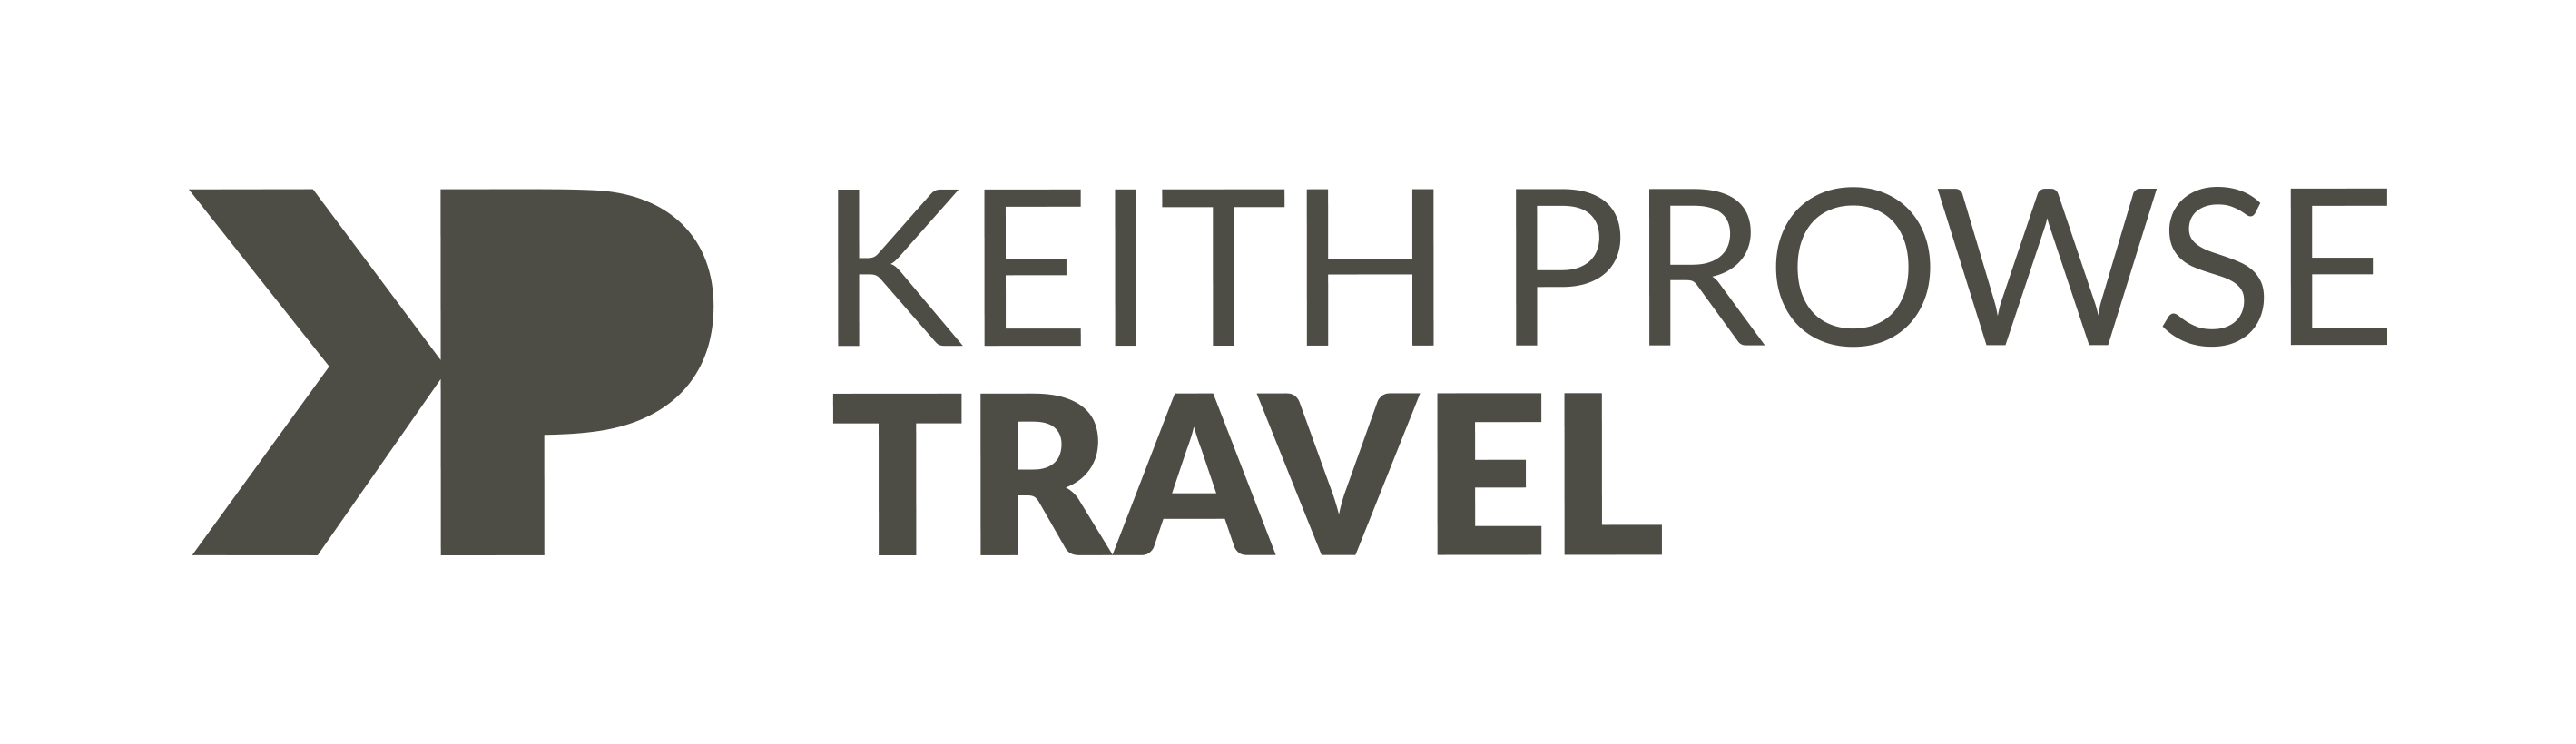 Keith Prowse Travel